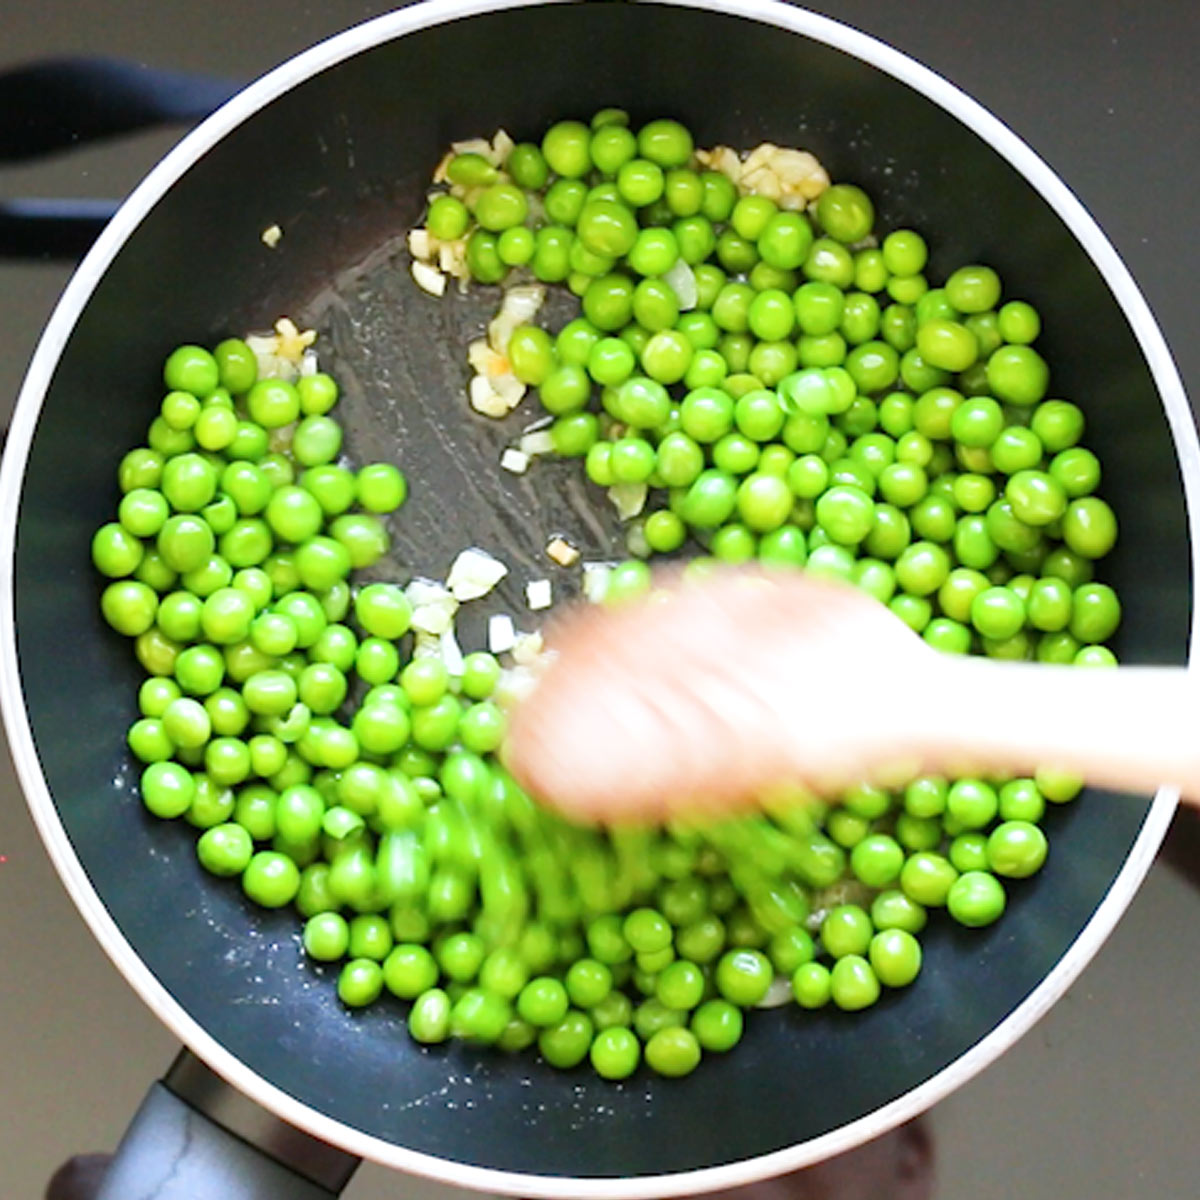 stir green peas to butter and olive oil